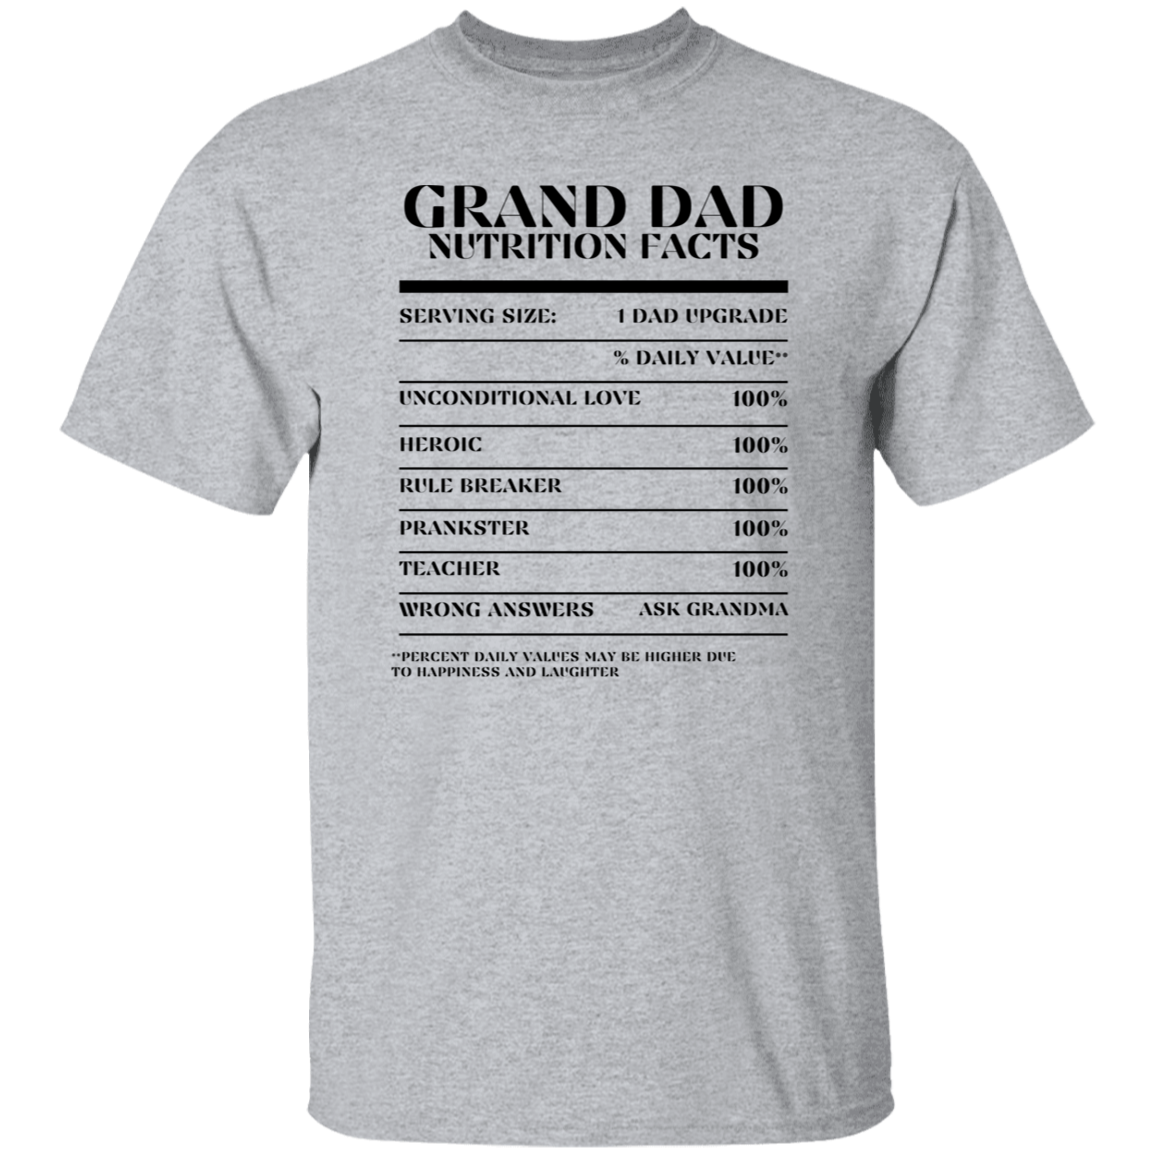 Nutrition Facts T-Shirt SS - Grand Dad - Black